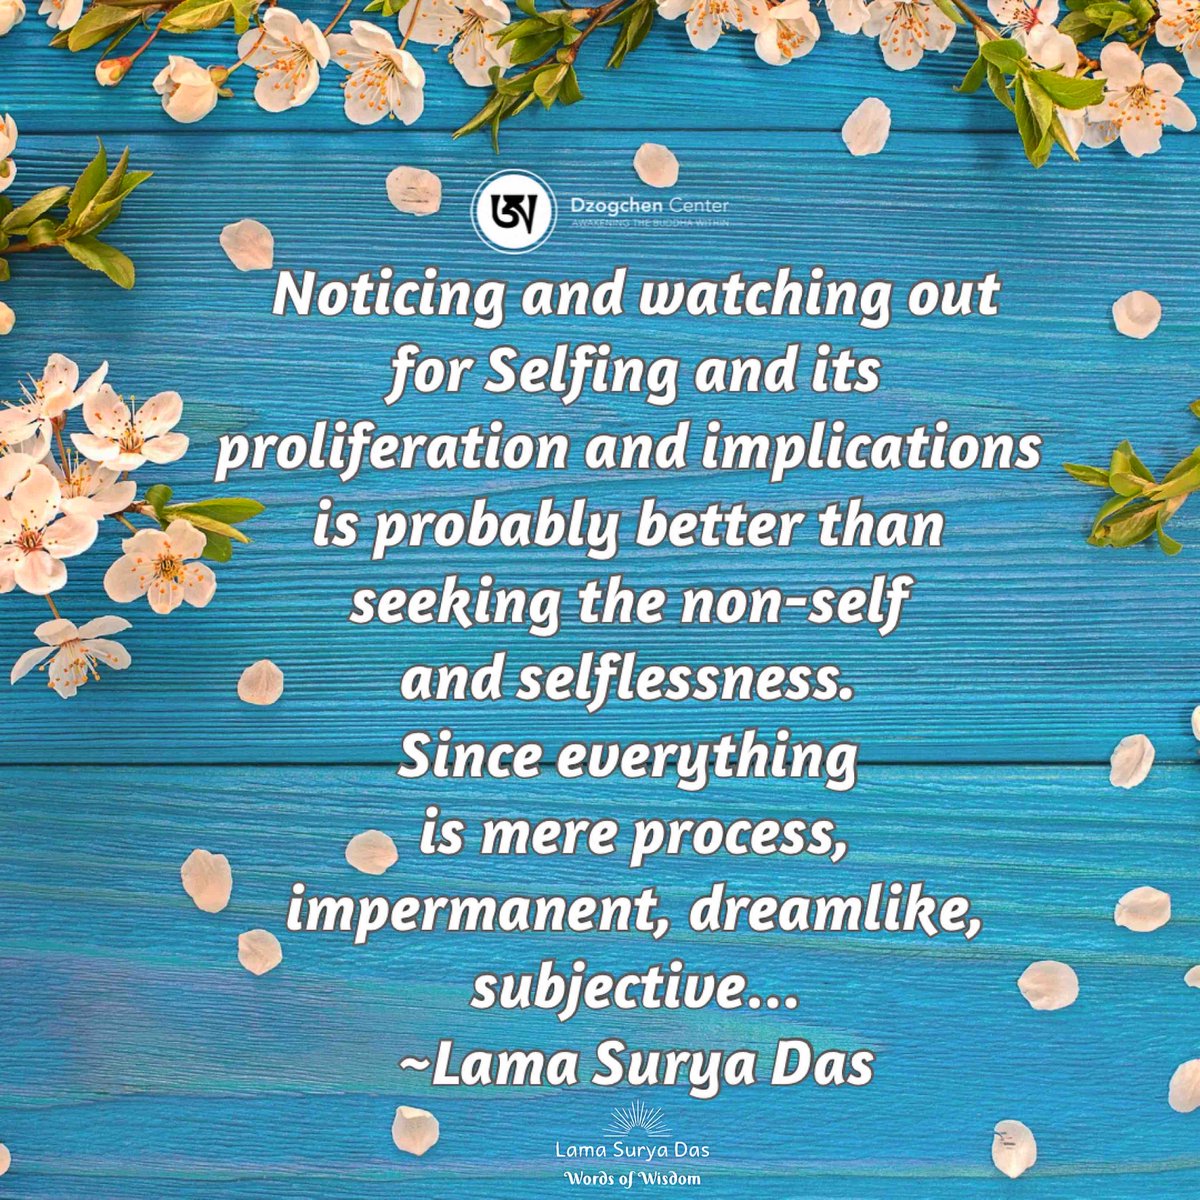 Noticing & watching out for Selfing and its proliferation & implications is probably better than seeking non-self & selflessness. Since everything is mere process, impermanent, dreamlike, subjective…~Lama Surya Das
#LamaSuryaDas #Dzogchen #SelfInquiry #AwakeningtheBuddhaWithin